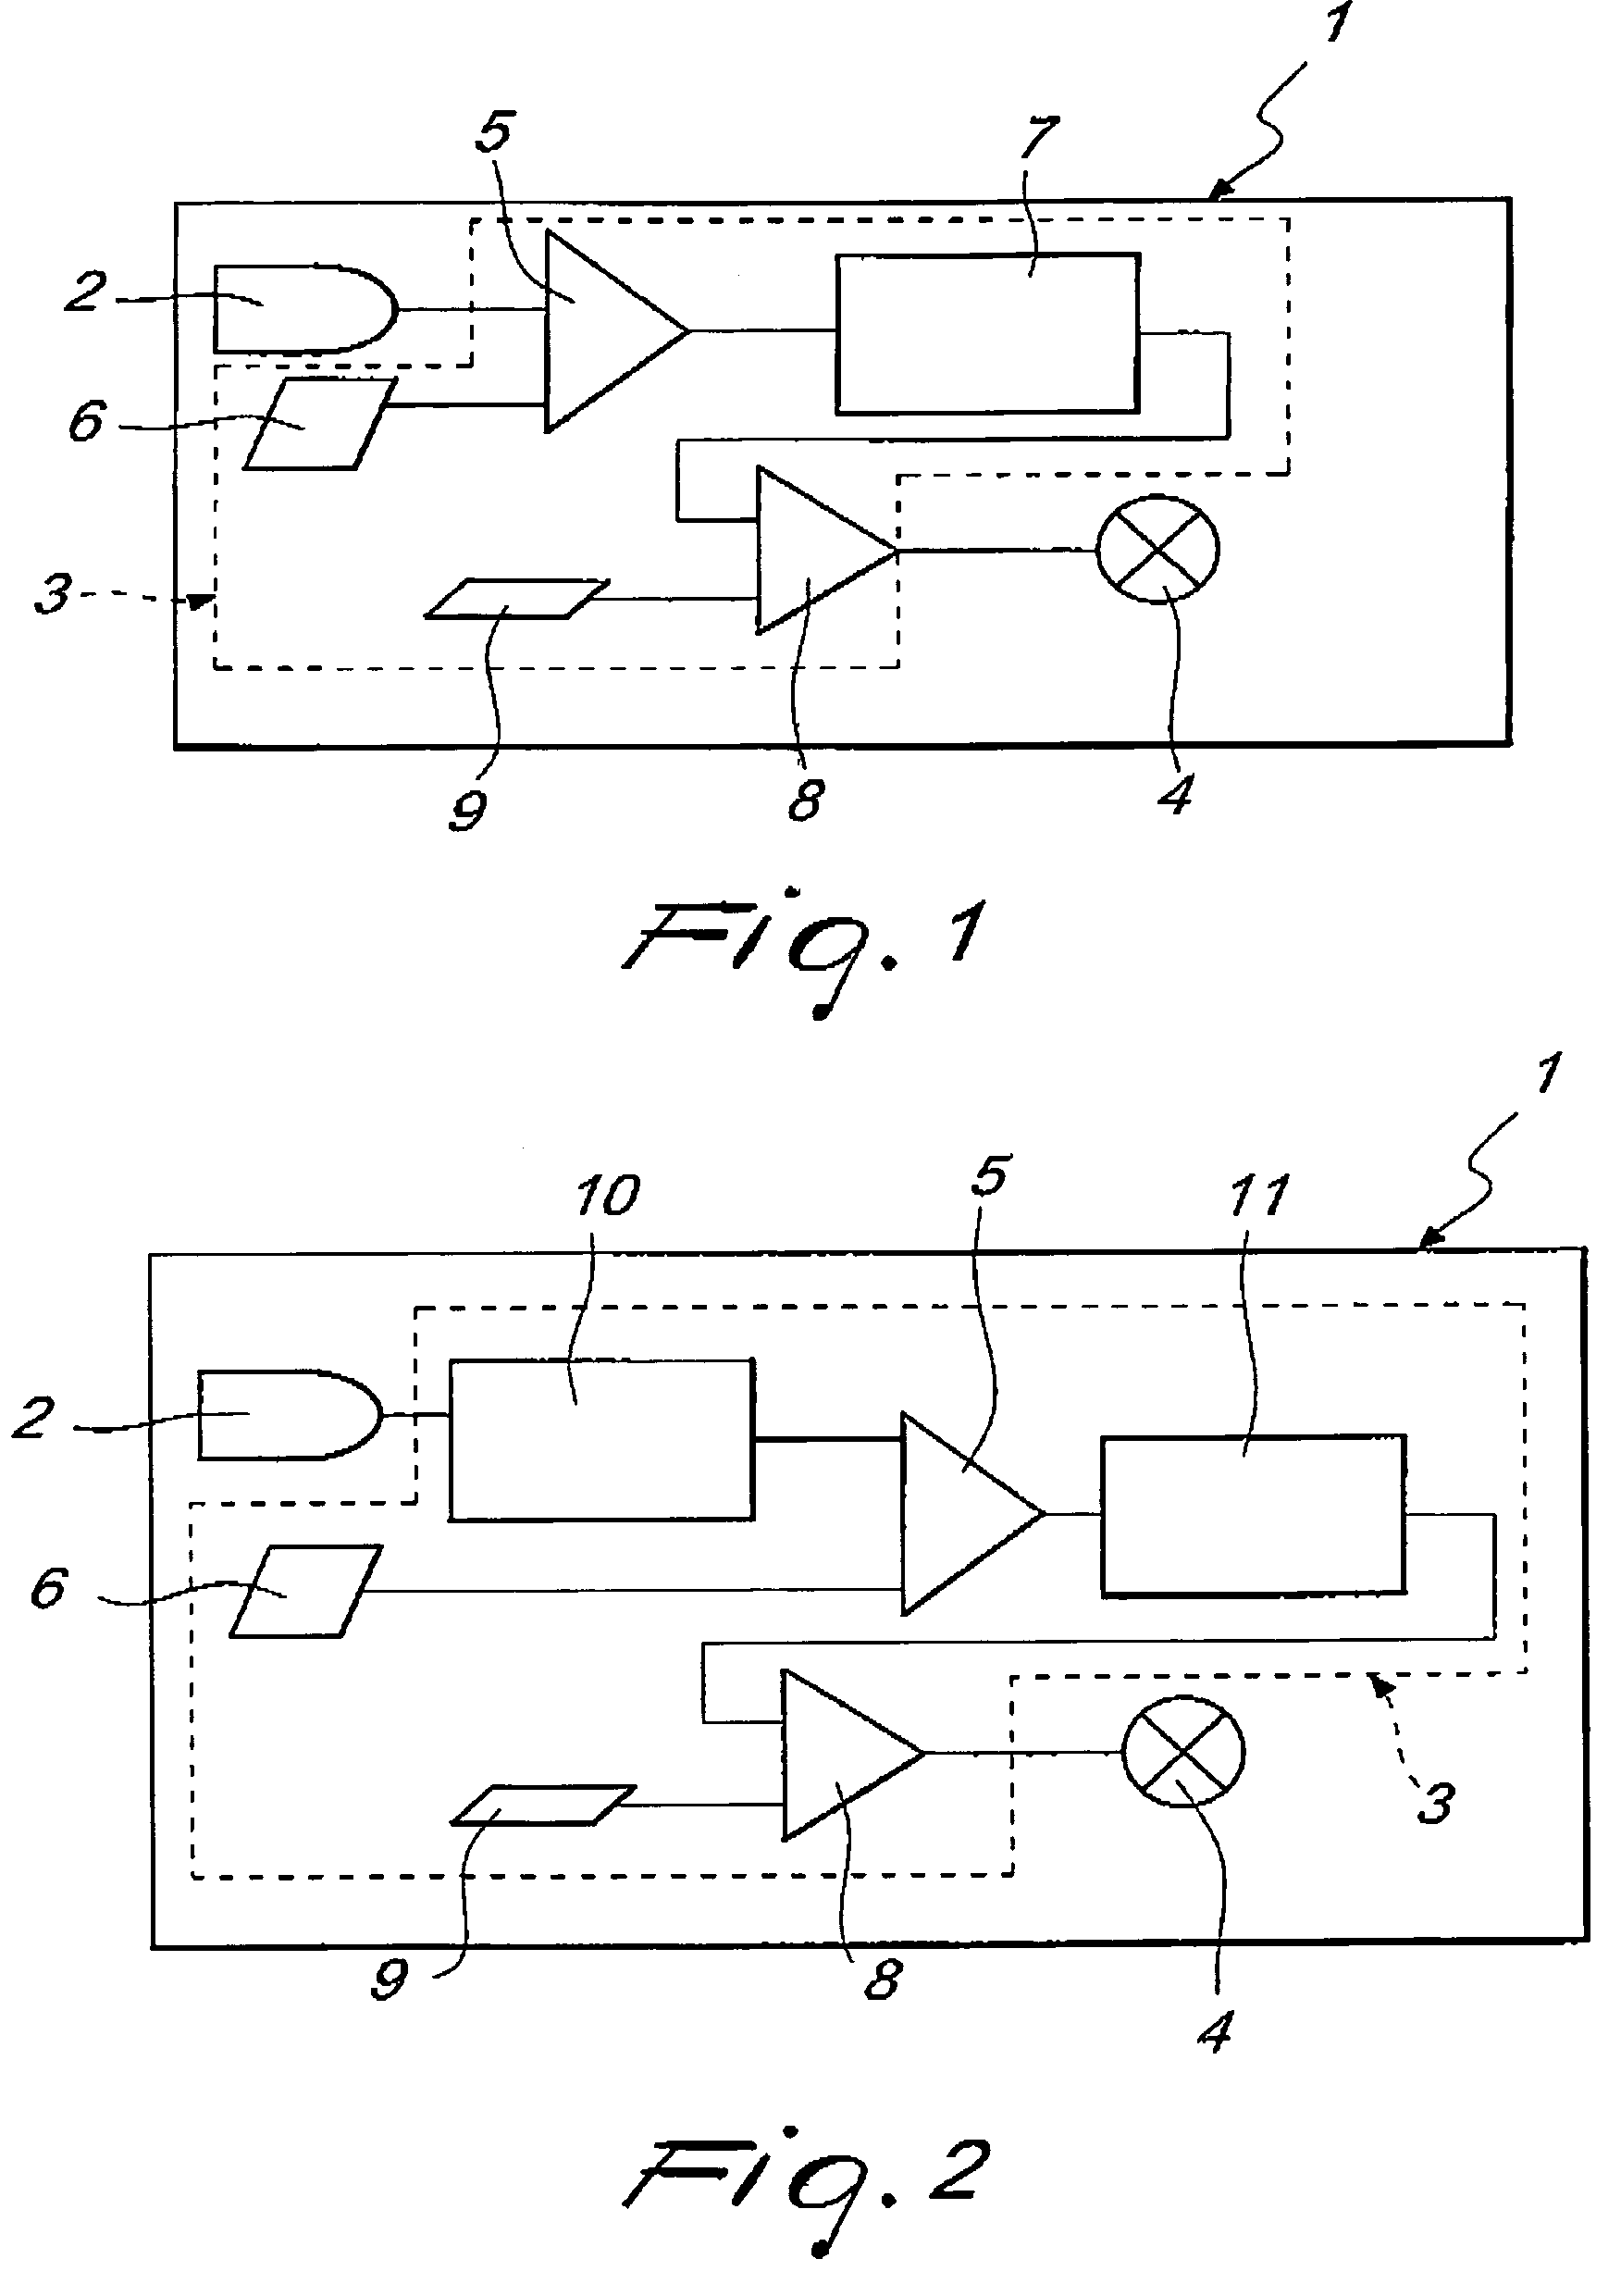 Method for detecting and reporting of fluid in distribution networks, particularly in condominium water or gas distribution networks, and apparatus for performing the method